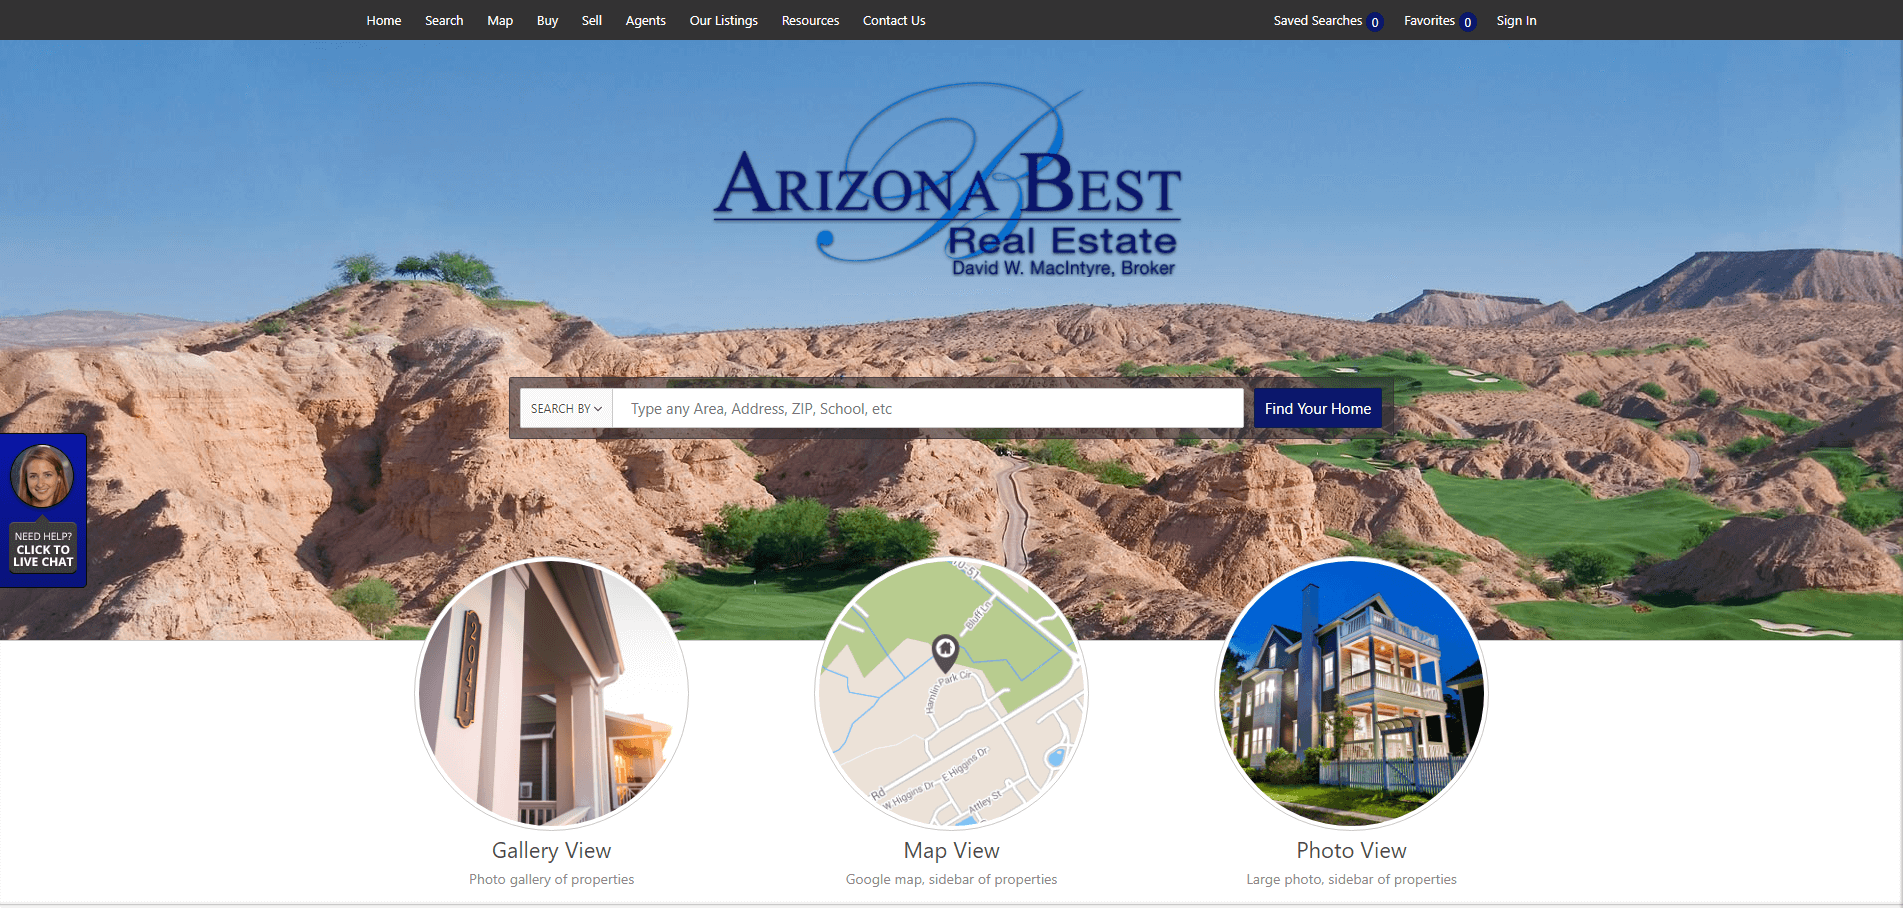  We ranked each site 1-101 and reviewed them all.  Here's arizonabest.com.  Who made the cut? 